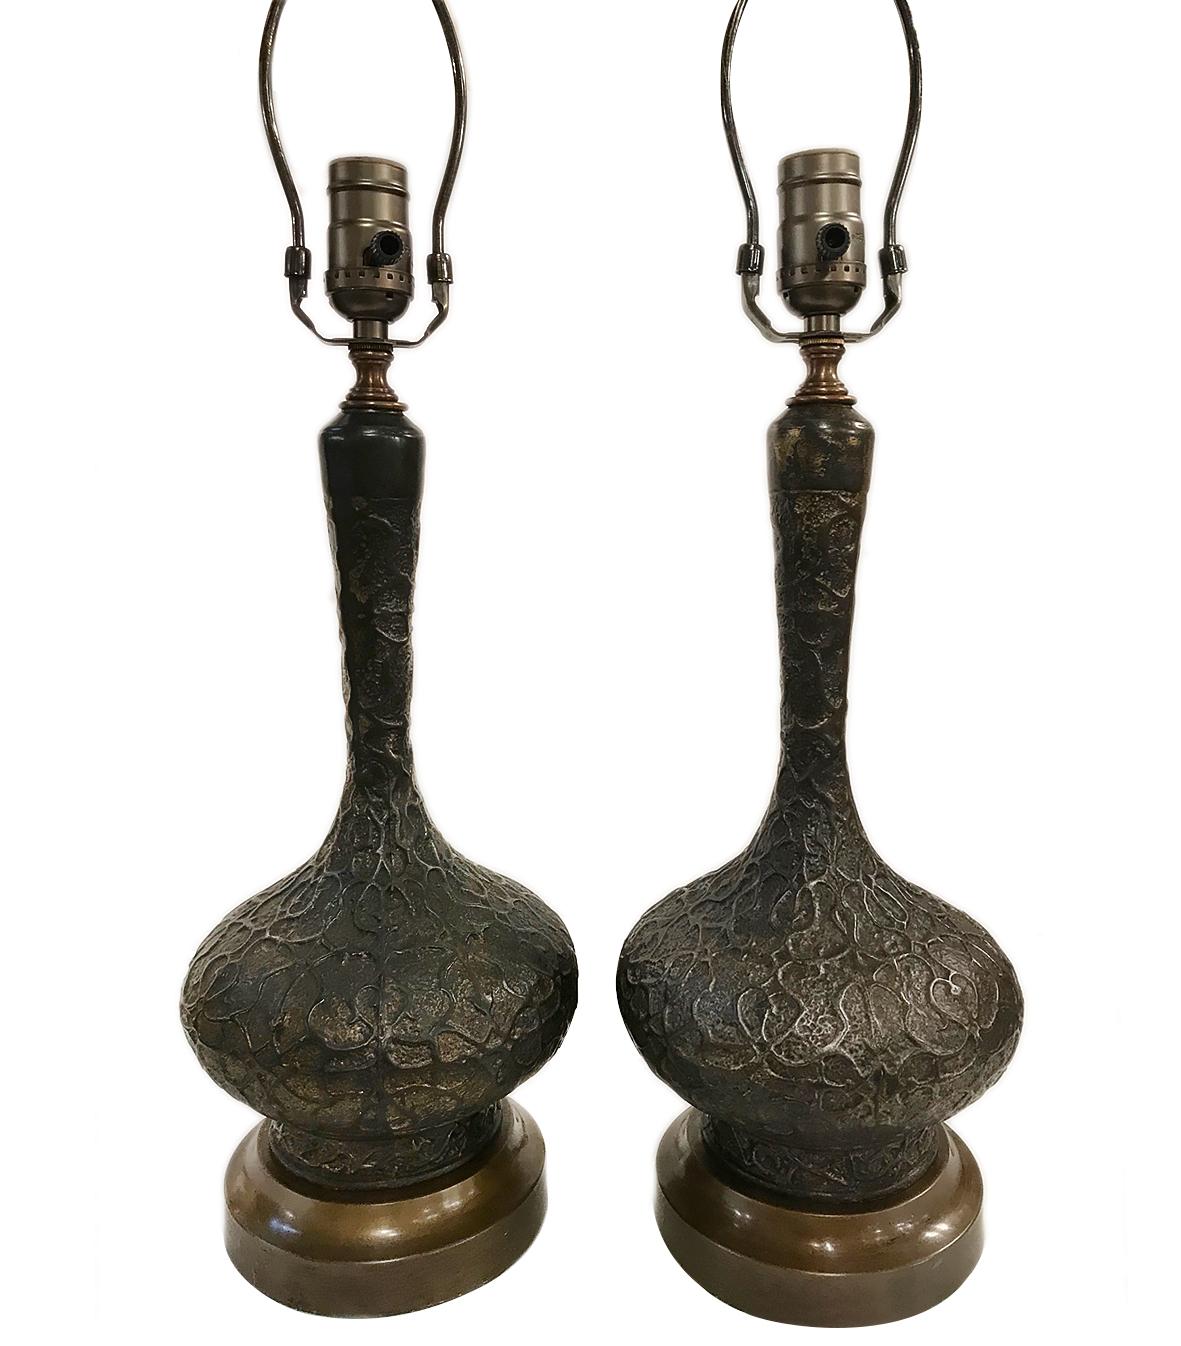 A pair of unique circa 1940s French patinated textured metal table lamps with original finish.

Measurements:
Height of body 14.5